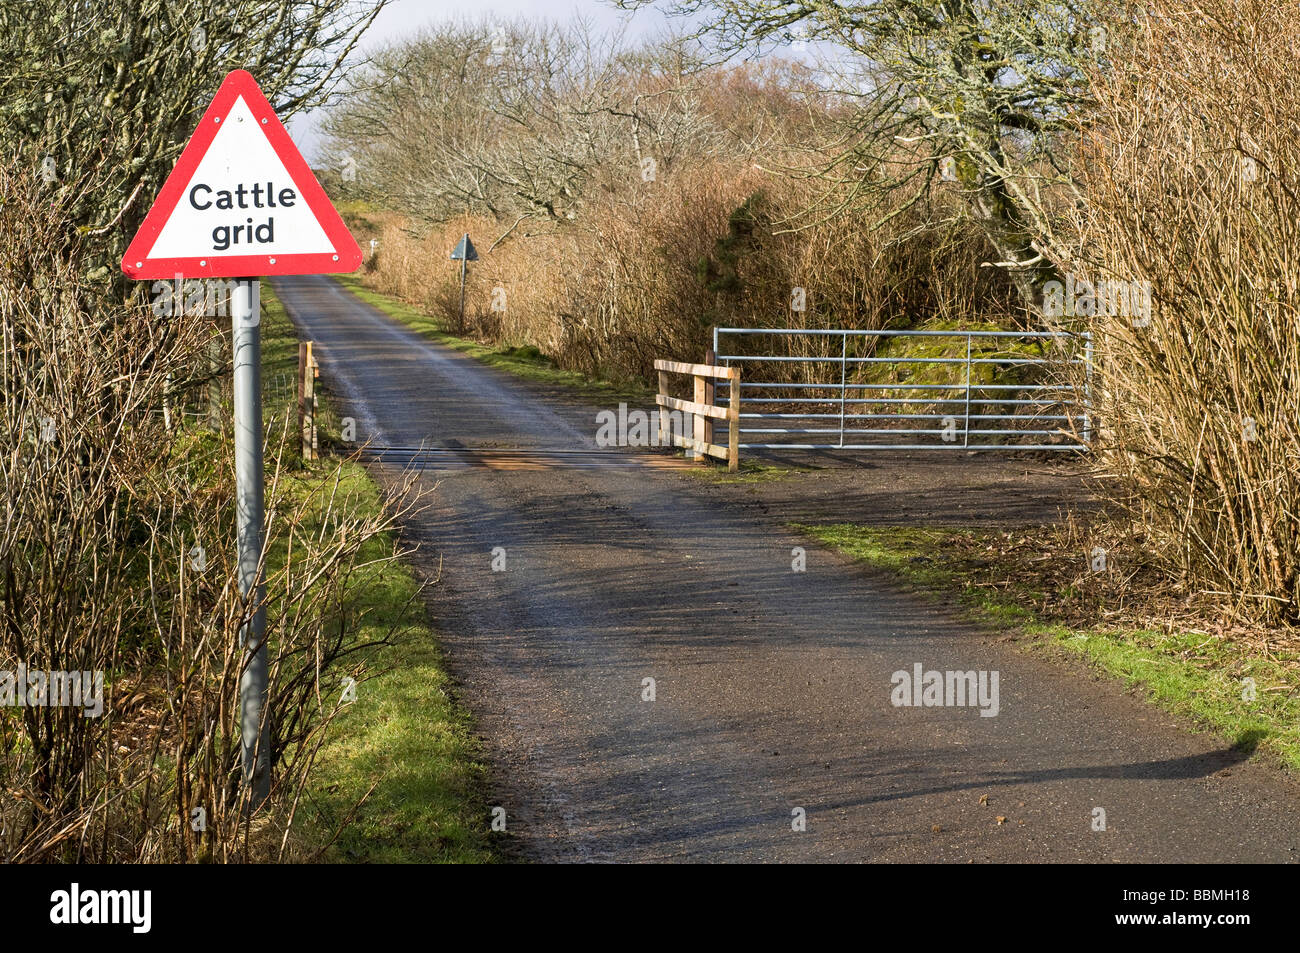 dh Scotland Country road ROADSIGN UK Caithness cattle grid gate motoring signpost roadsigns empty Stock Photo